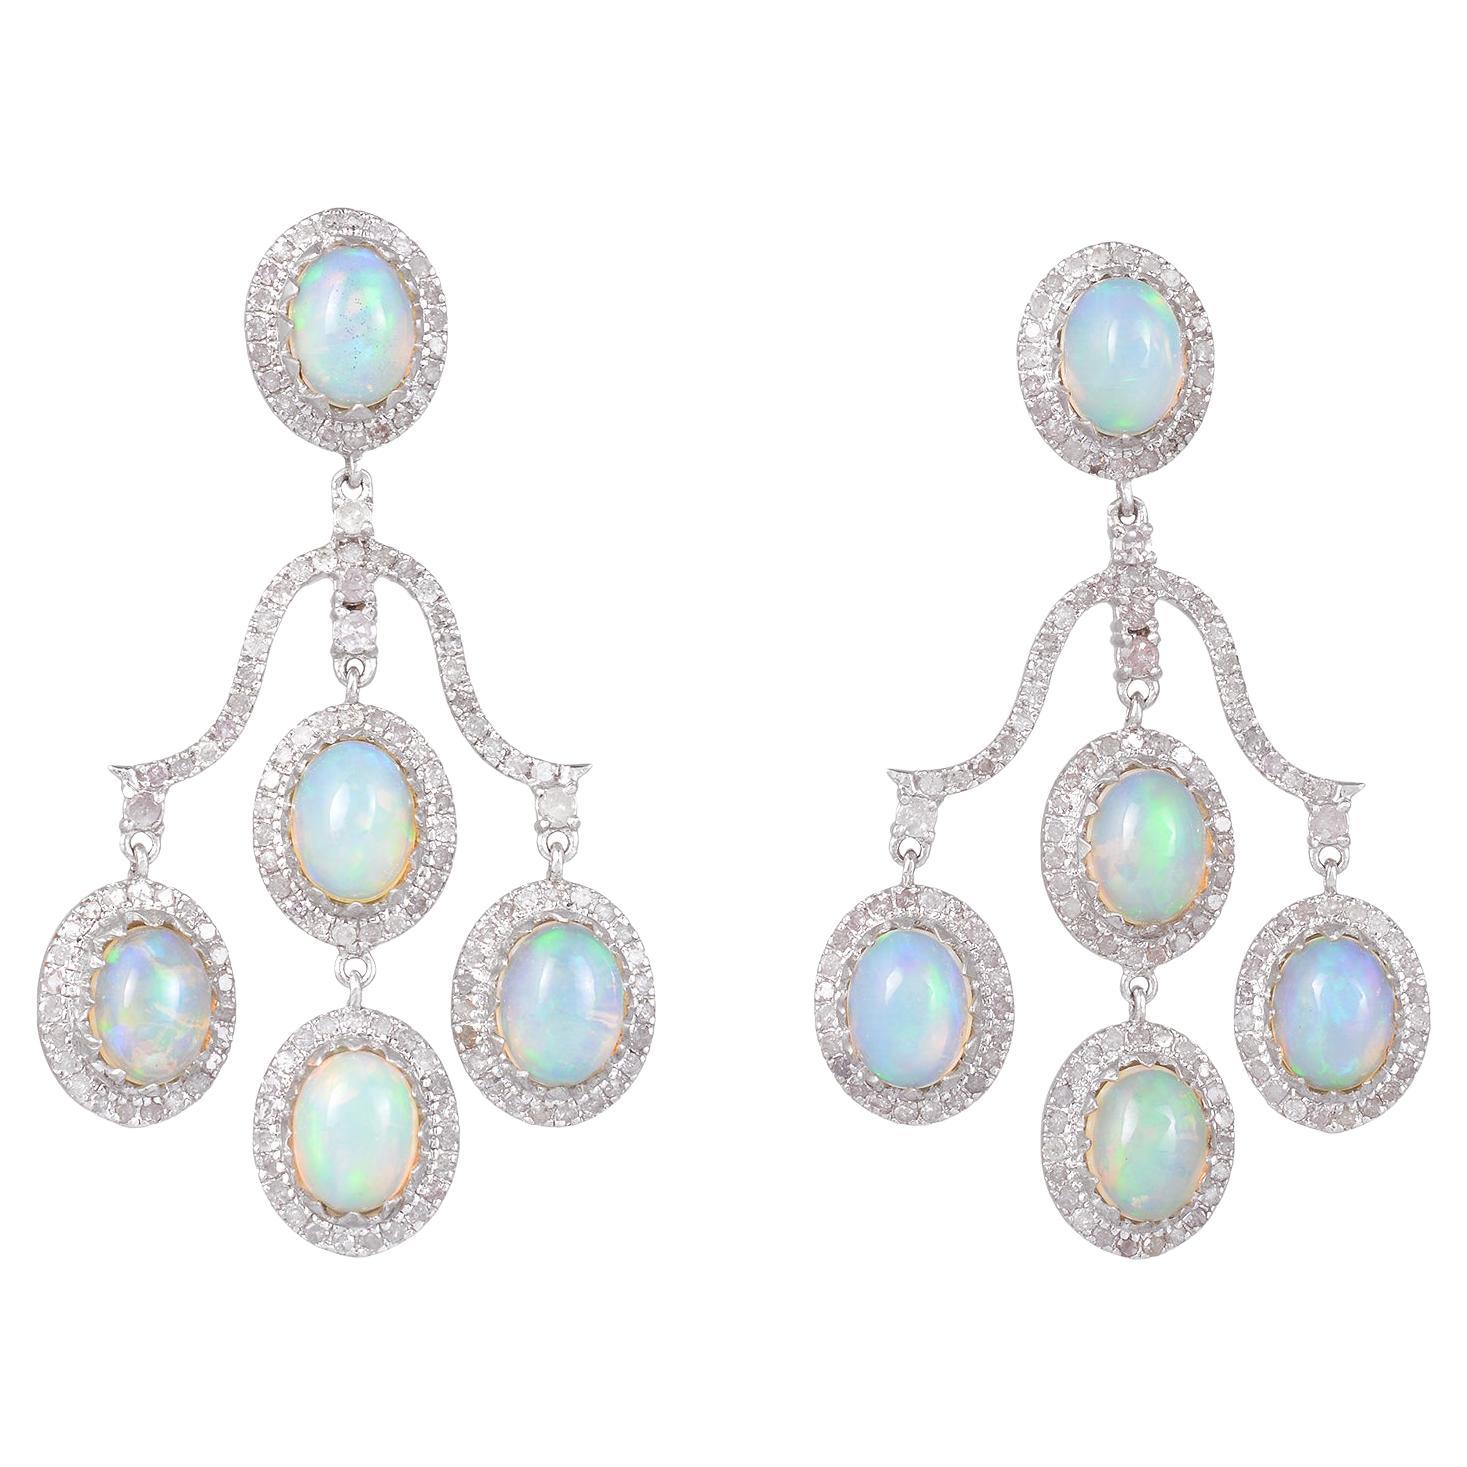 3.75 Carats Diamond and 2.52 Gms Gold and 925 Silver Diamond Opal Earring